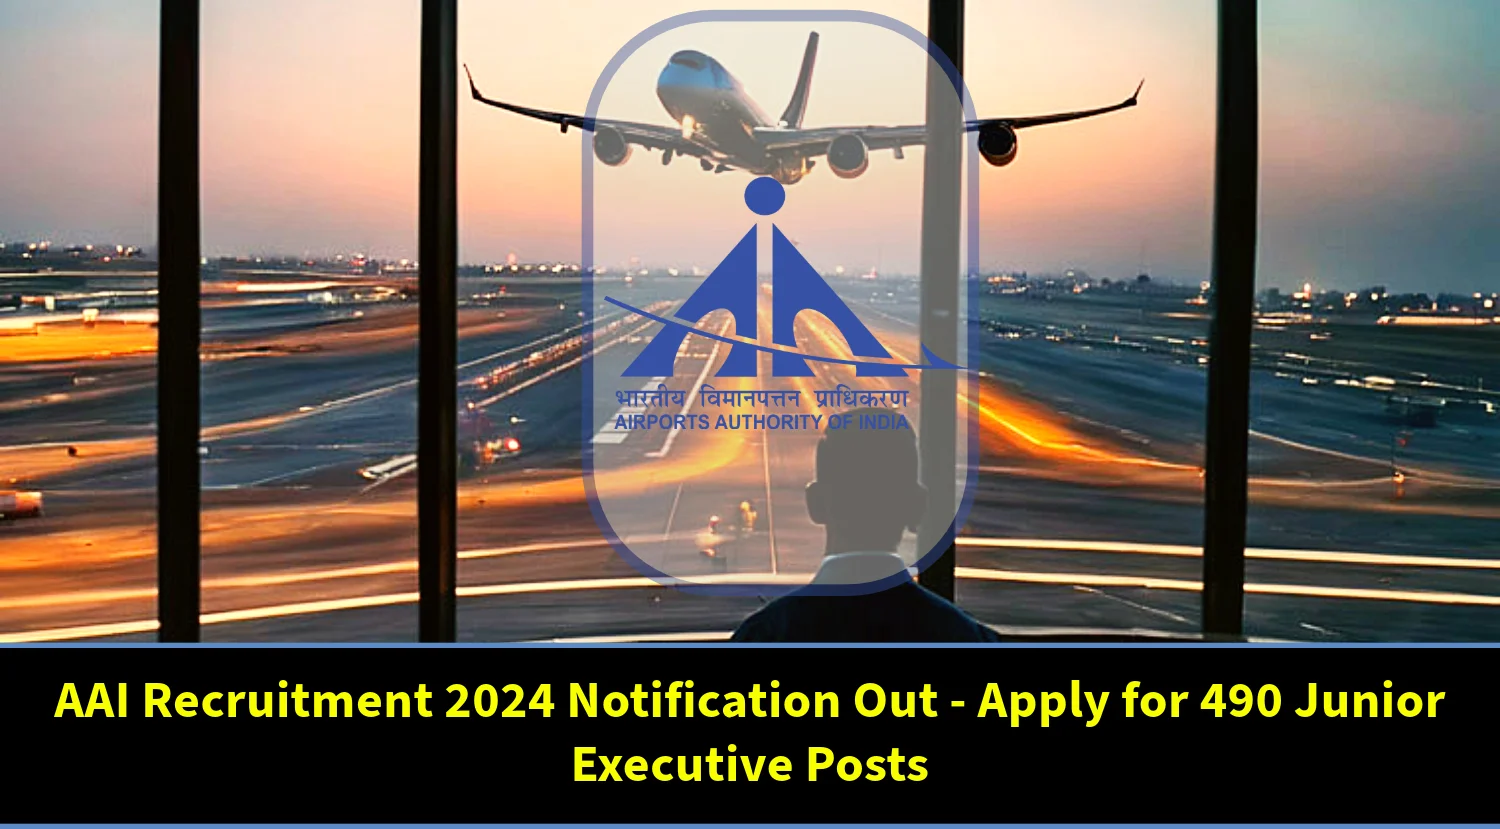 AAI Recruitment 2024 Notification Out - Apply for 490 Junior Executive Posts